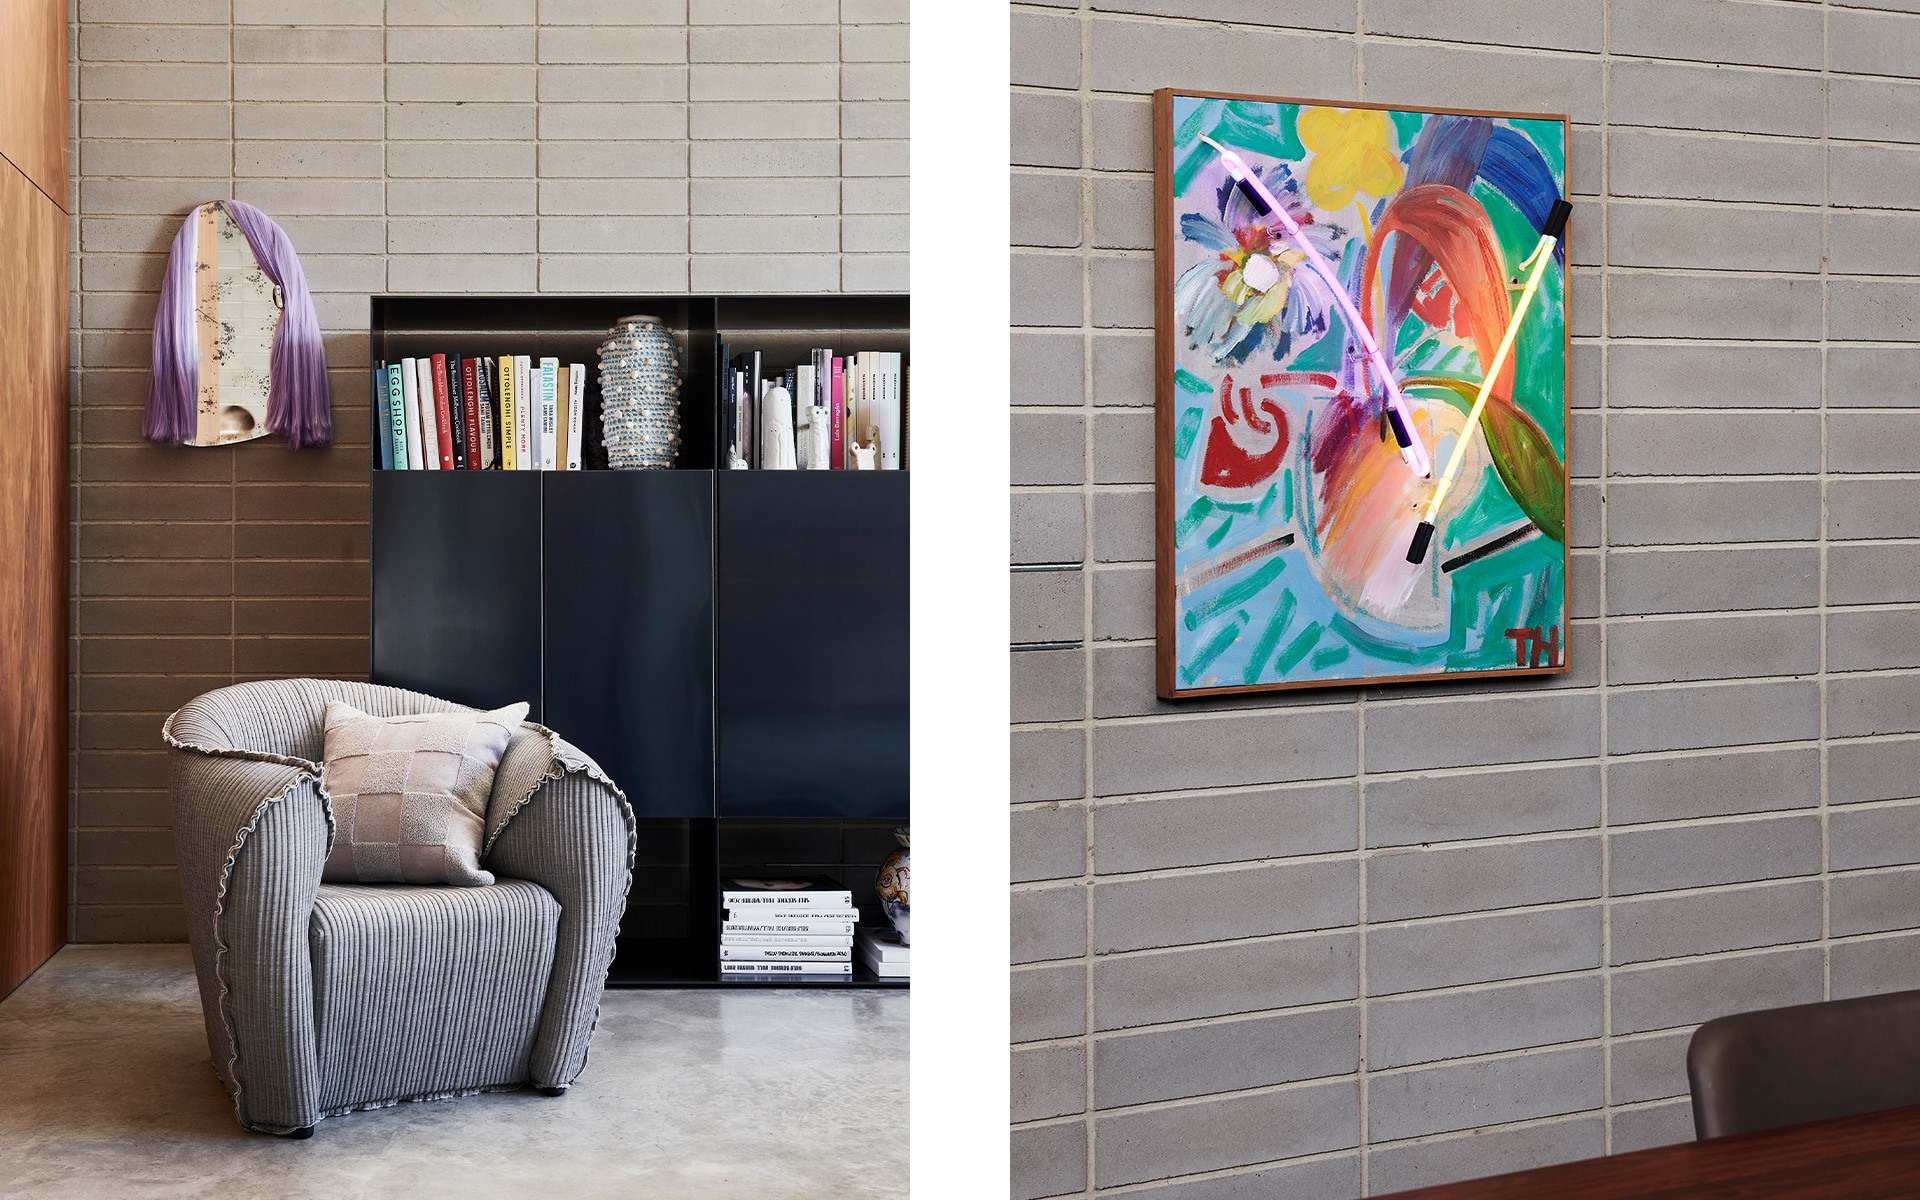 split image. right: textured chair with sheridan woodsdale cushion. black bookcase with books and vase. right: exposed brickwork with colourful artwork, featuring LED lights, hung on wall.